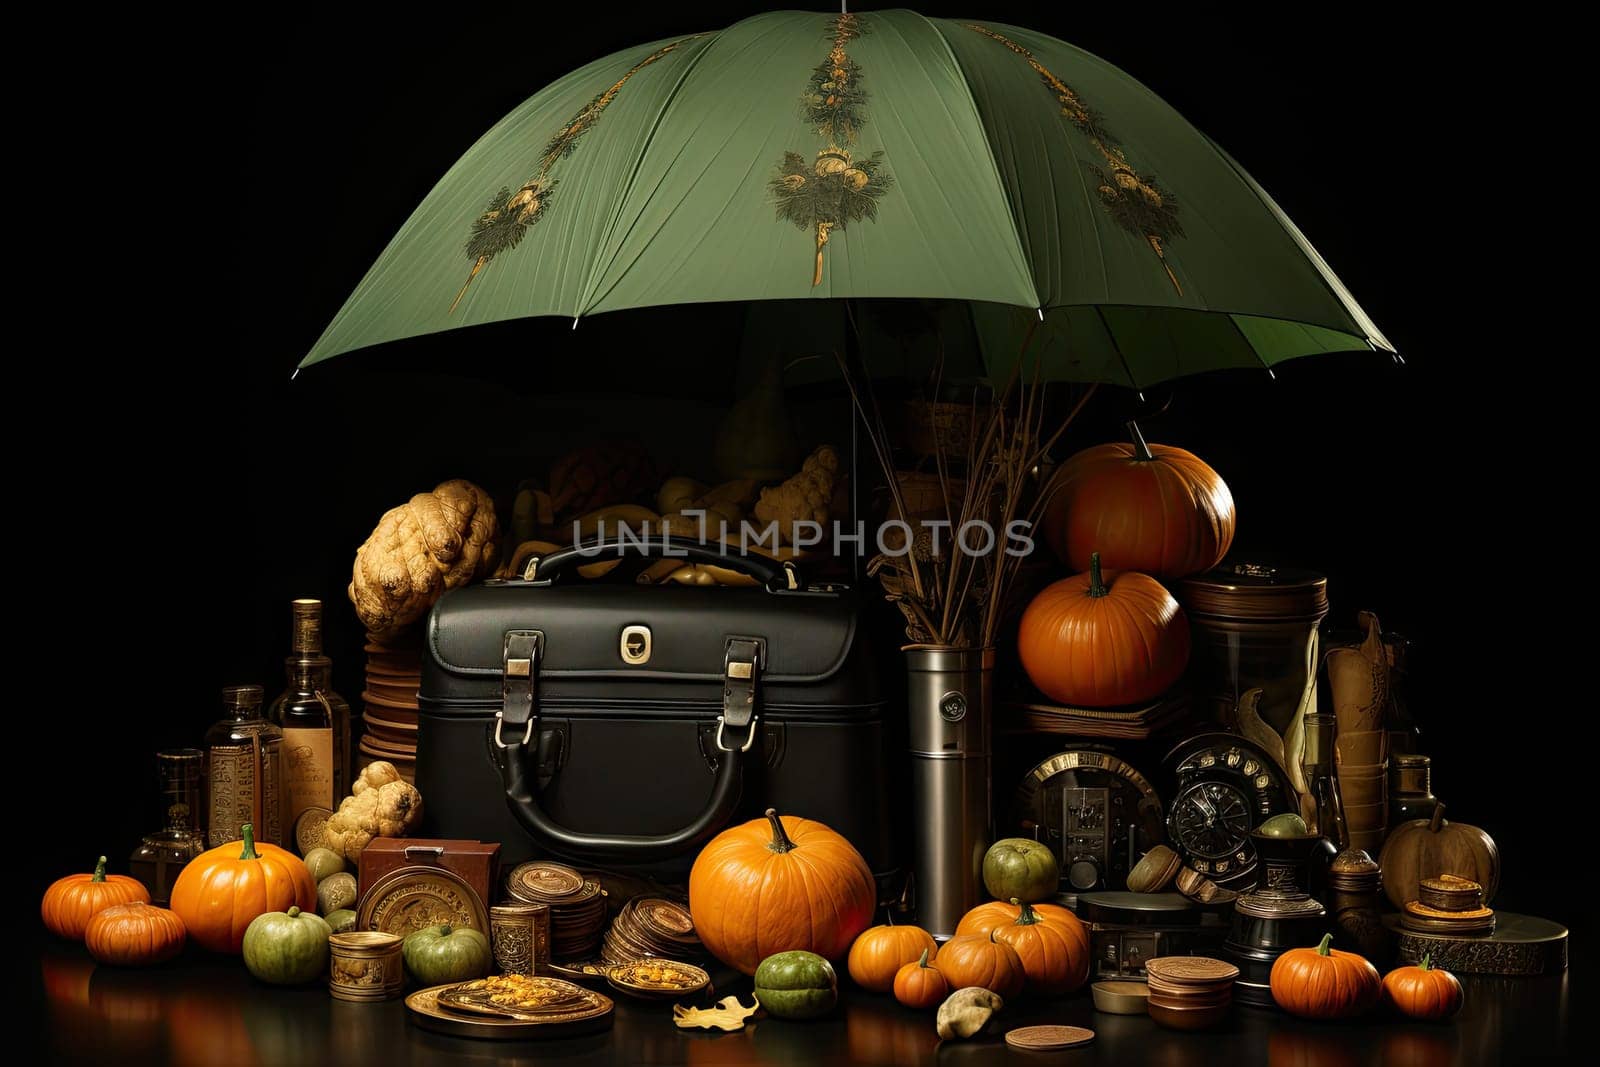 A Cozy Getaway: A Suitcase Finding Shelter Under a Vibrant Green Umbrella, Surrounded by Miscellaneous Objects